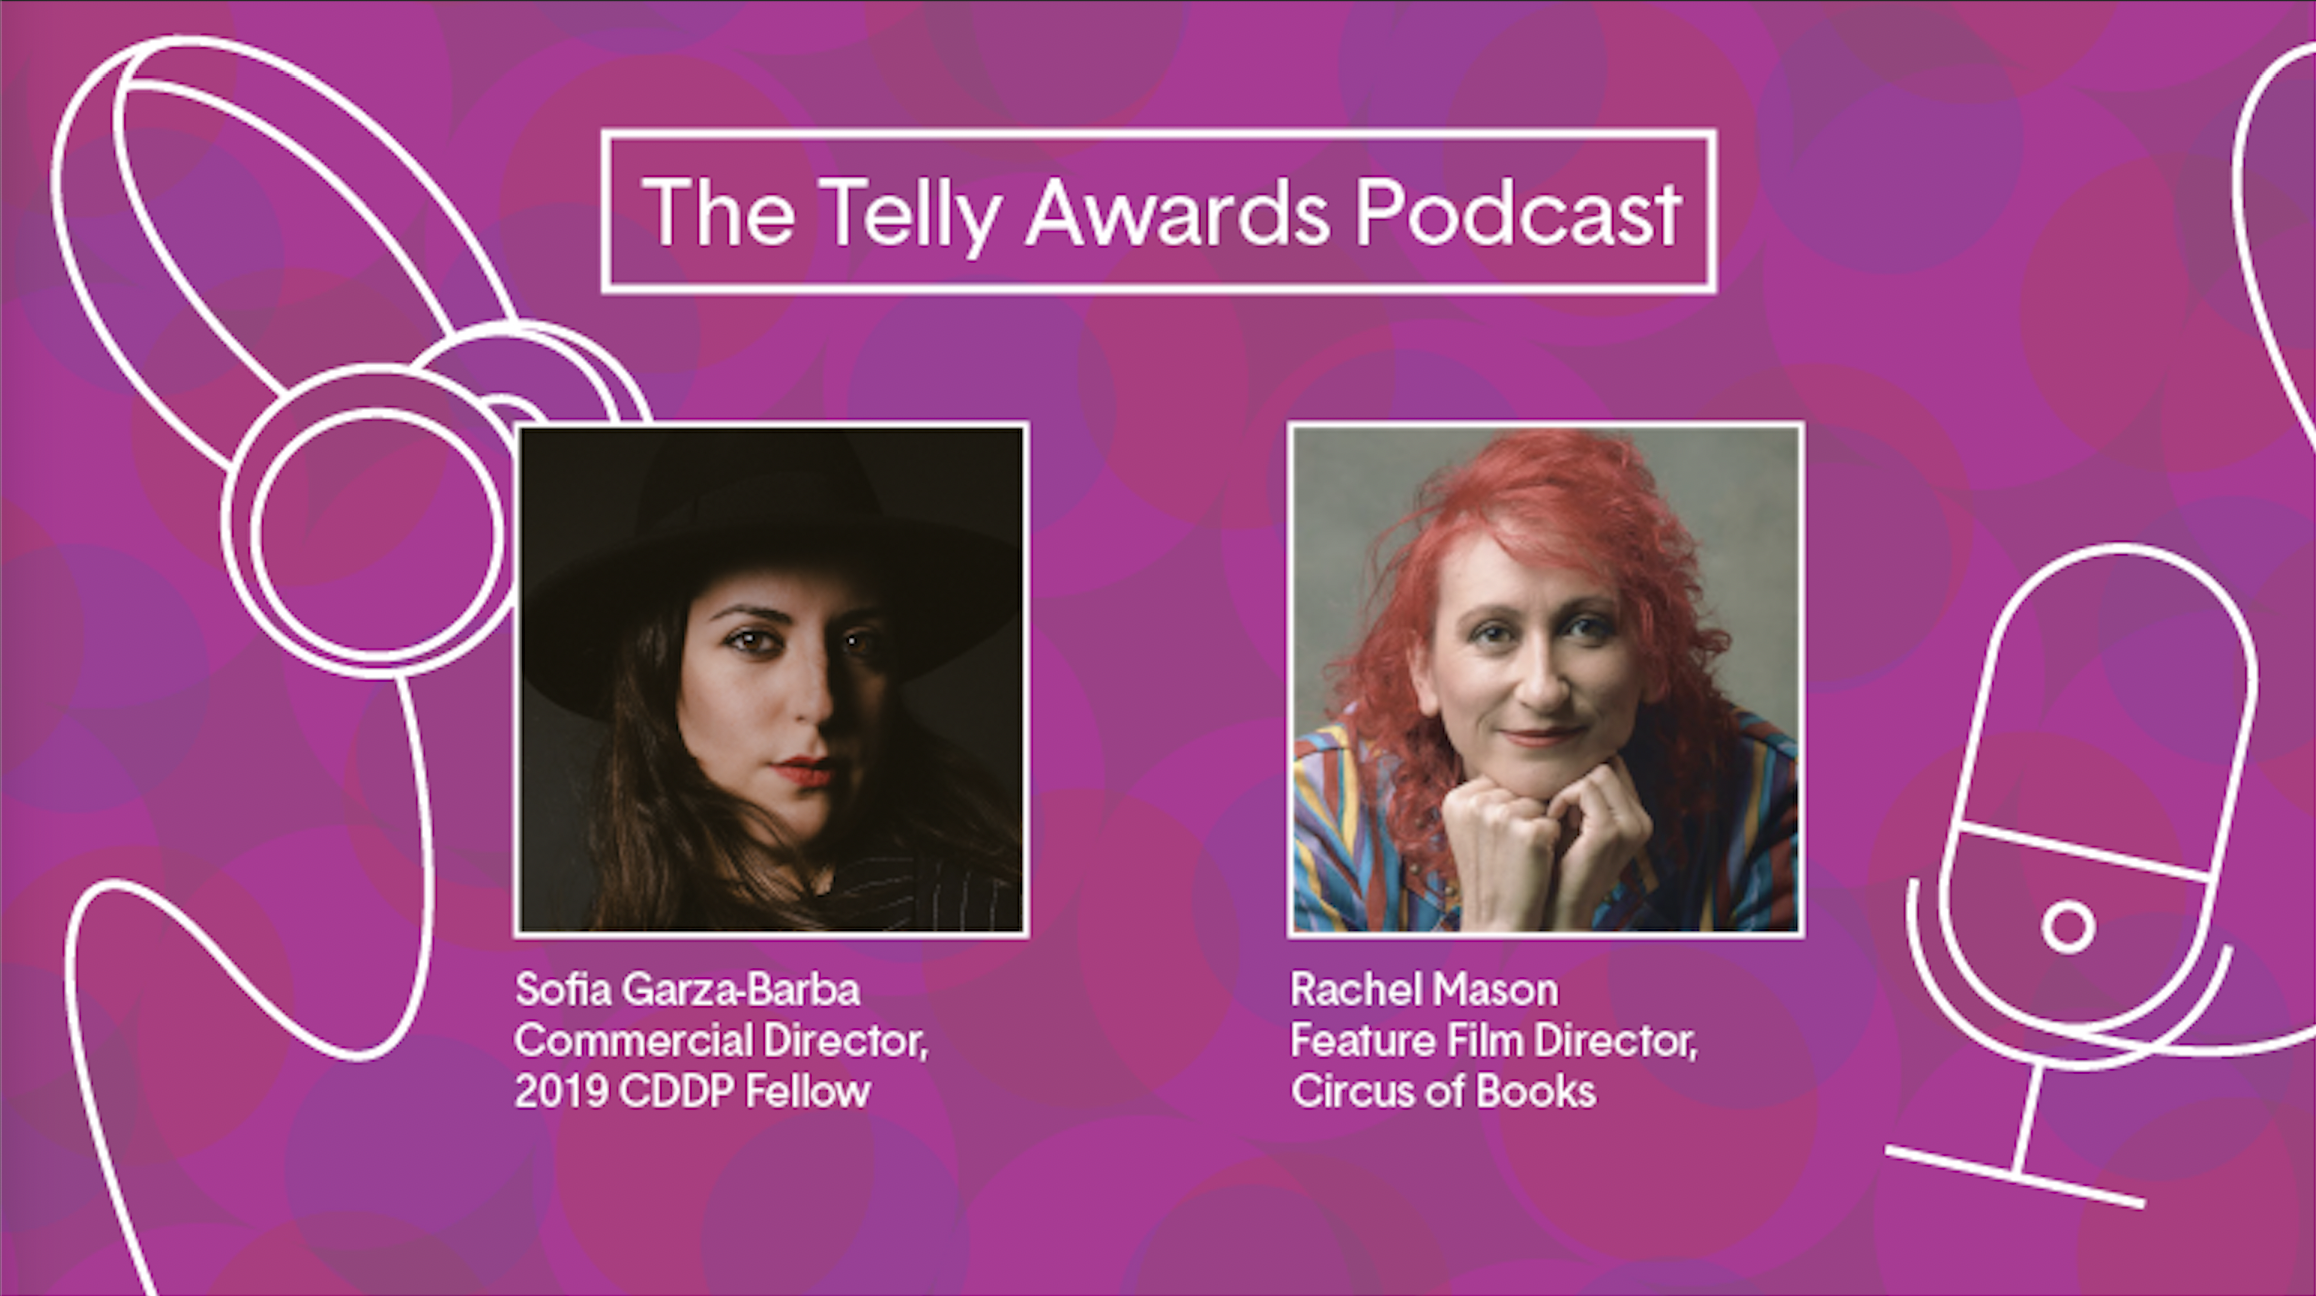 The Telly Awards Podcast Episode 3: Directing